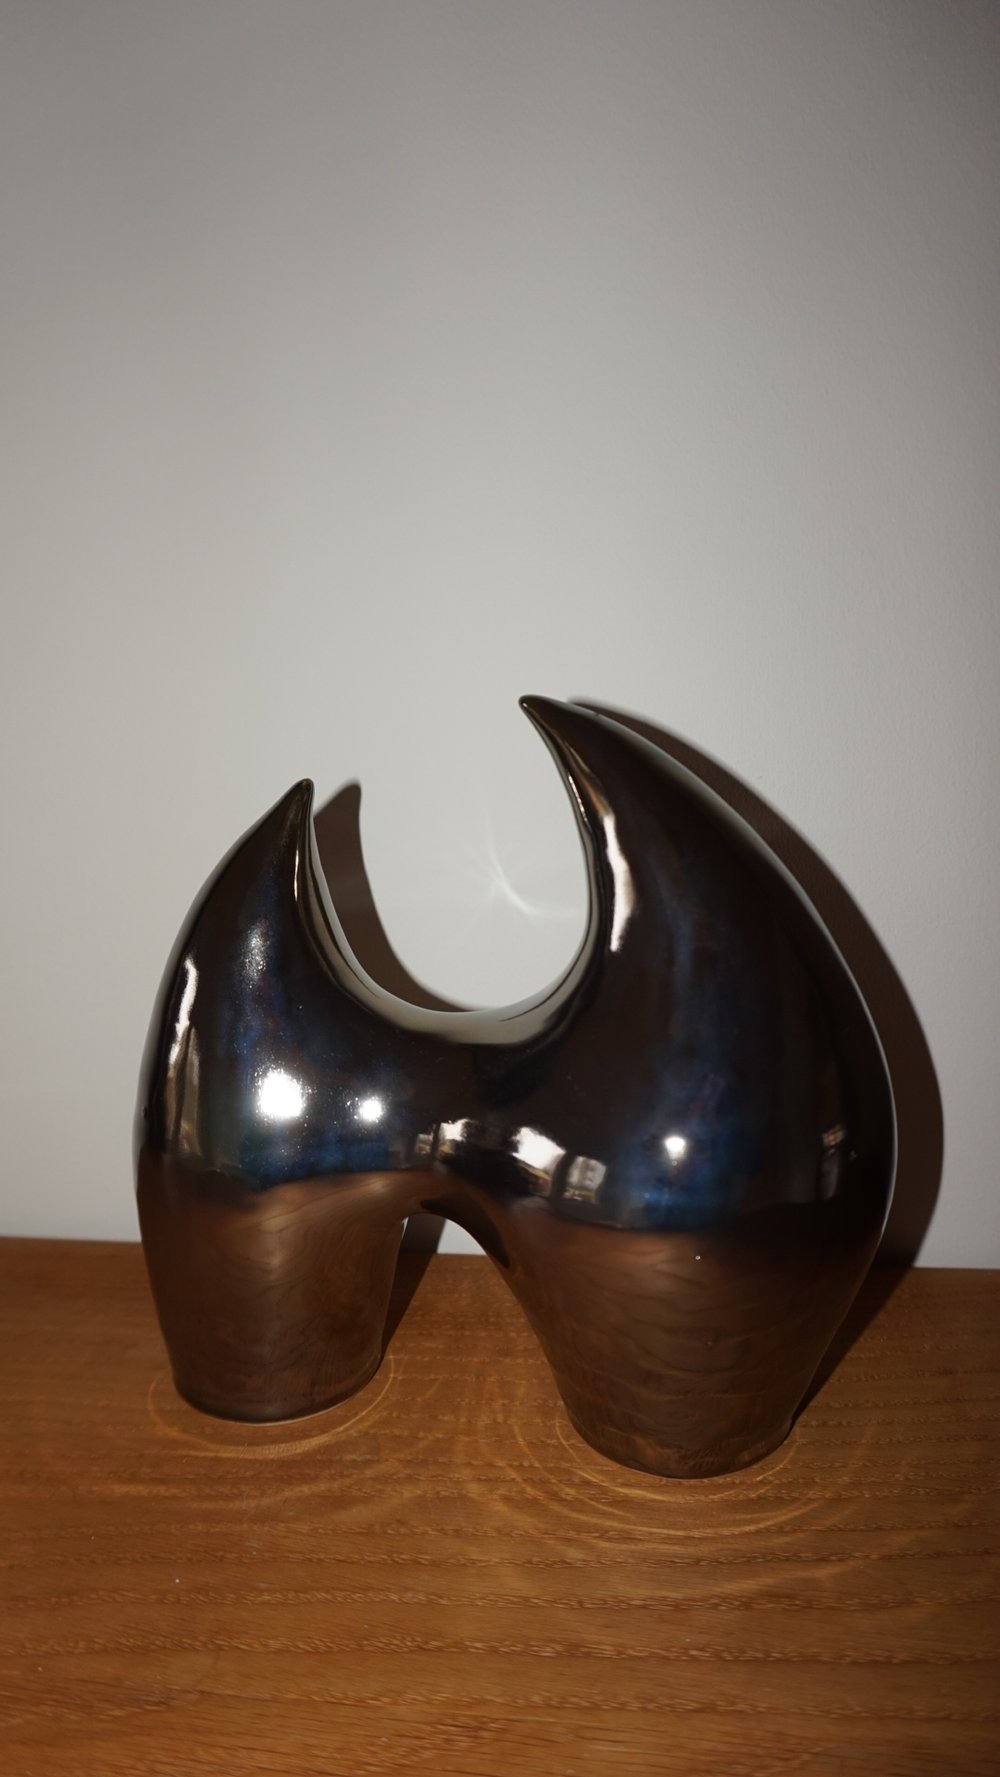 Image of "The evil moon duo sculpture"